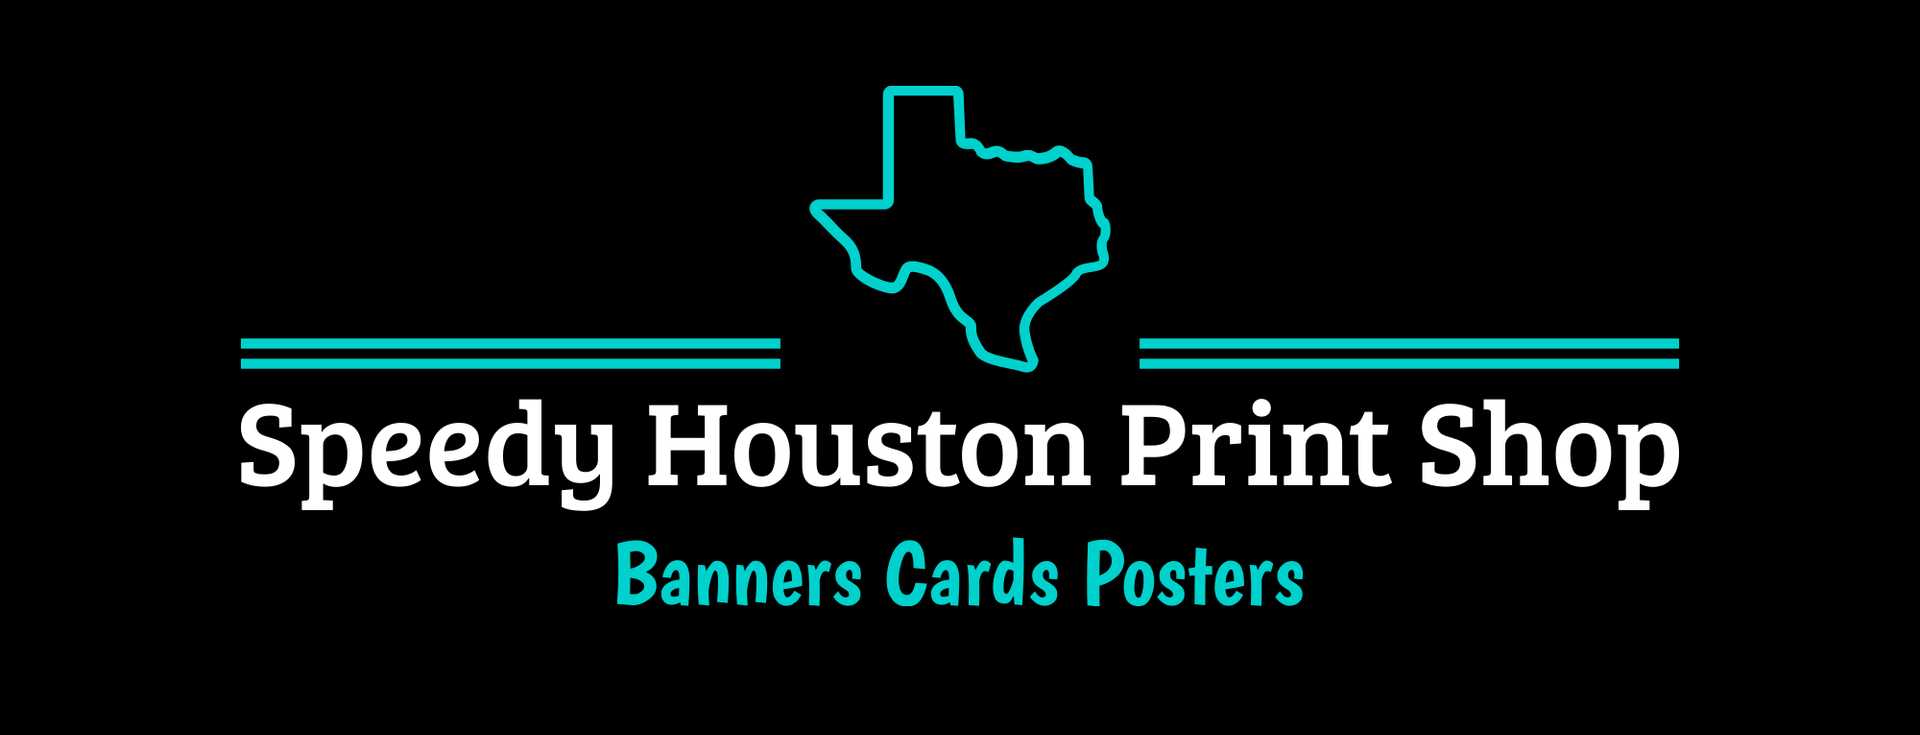 Speedy Houston Print Shop Banners Cards Posters Logo